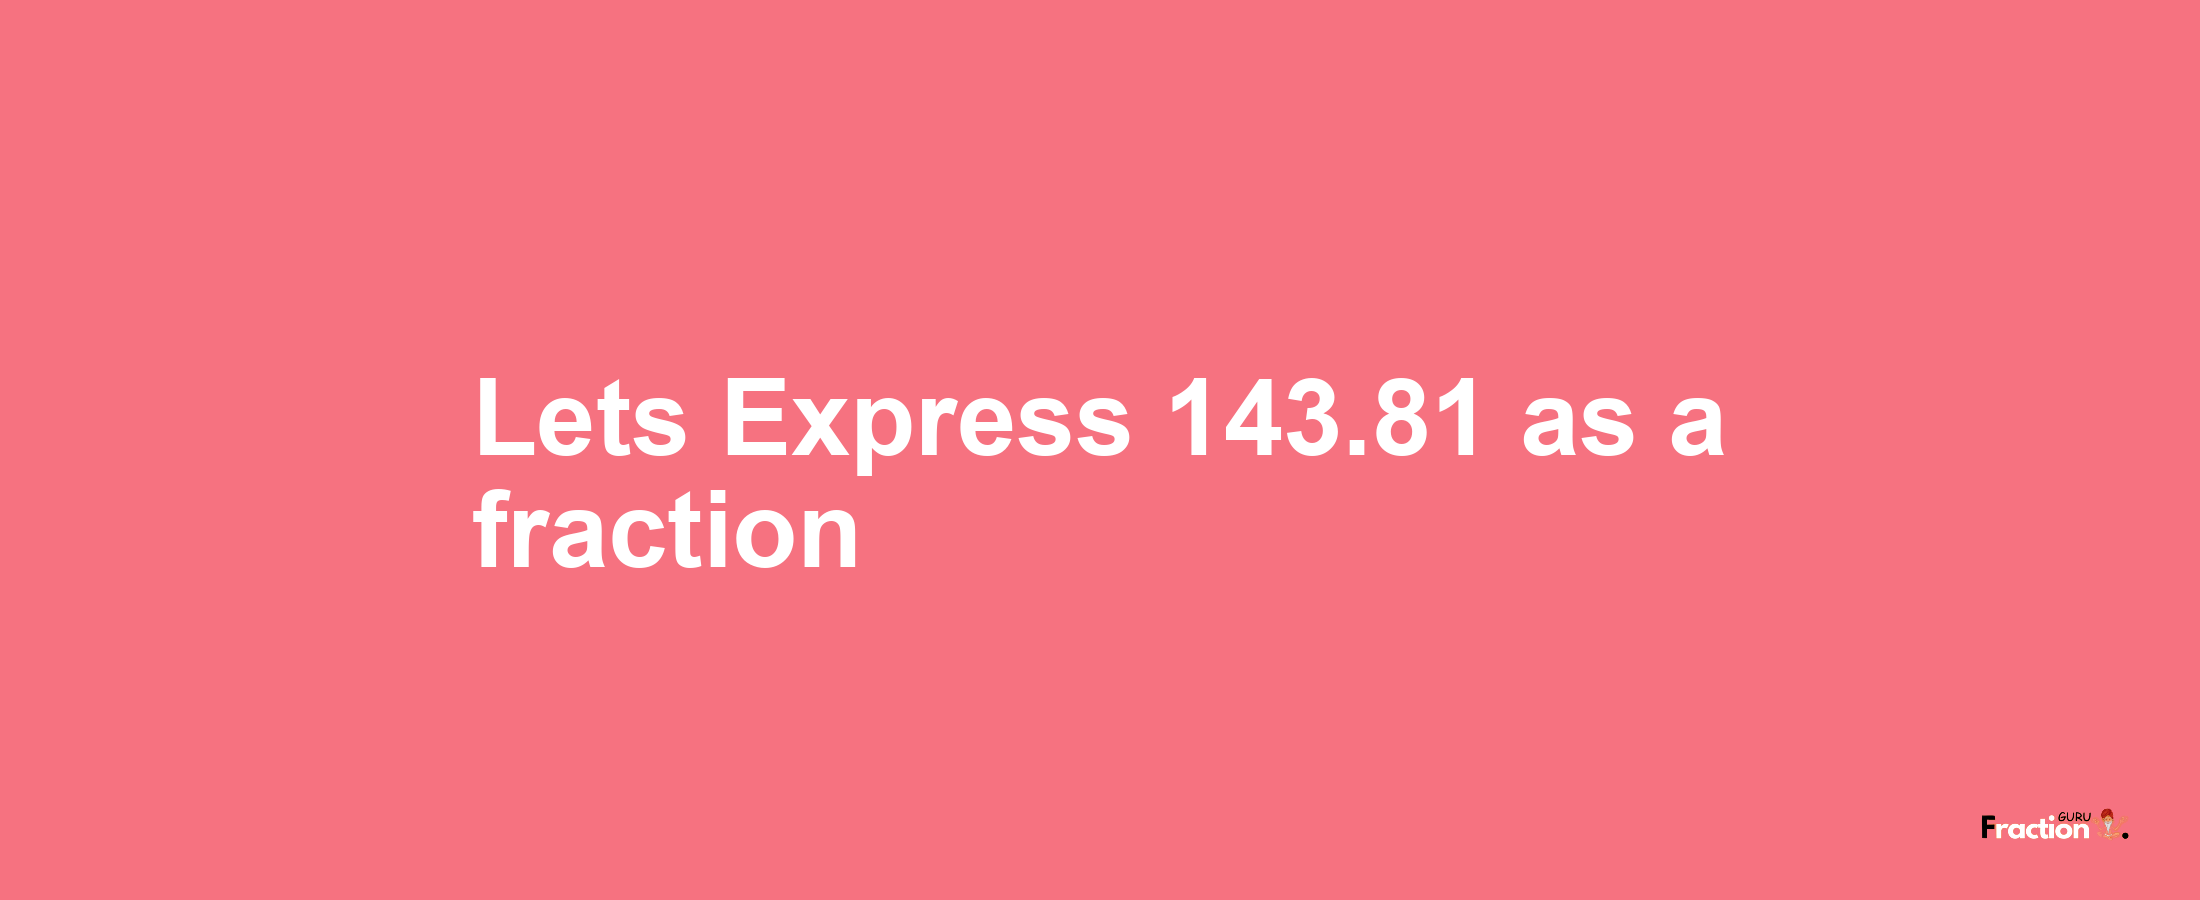 Lets Express 143.81 as afraction